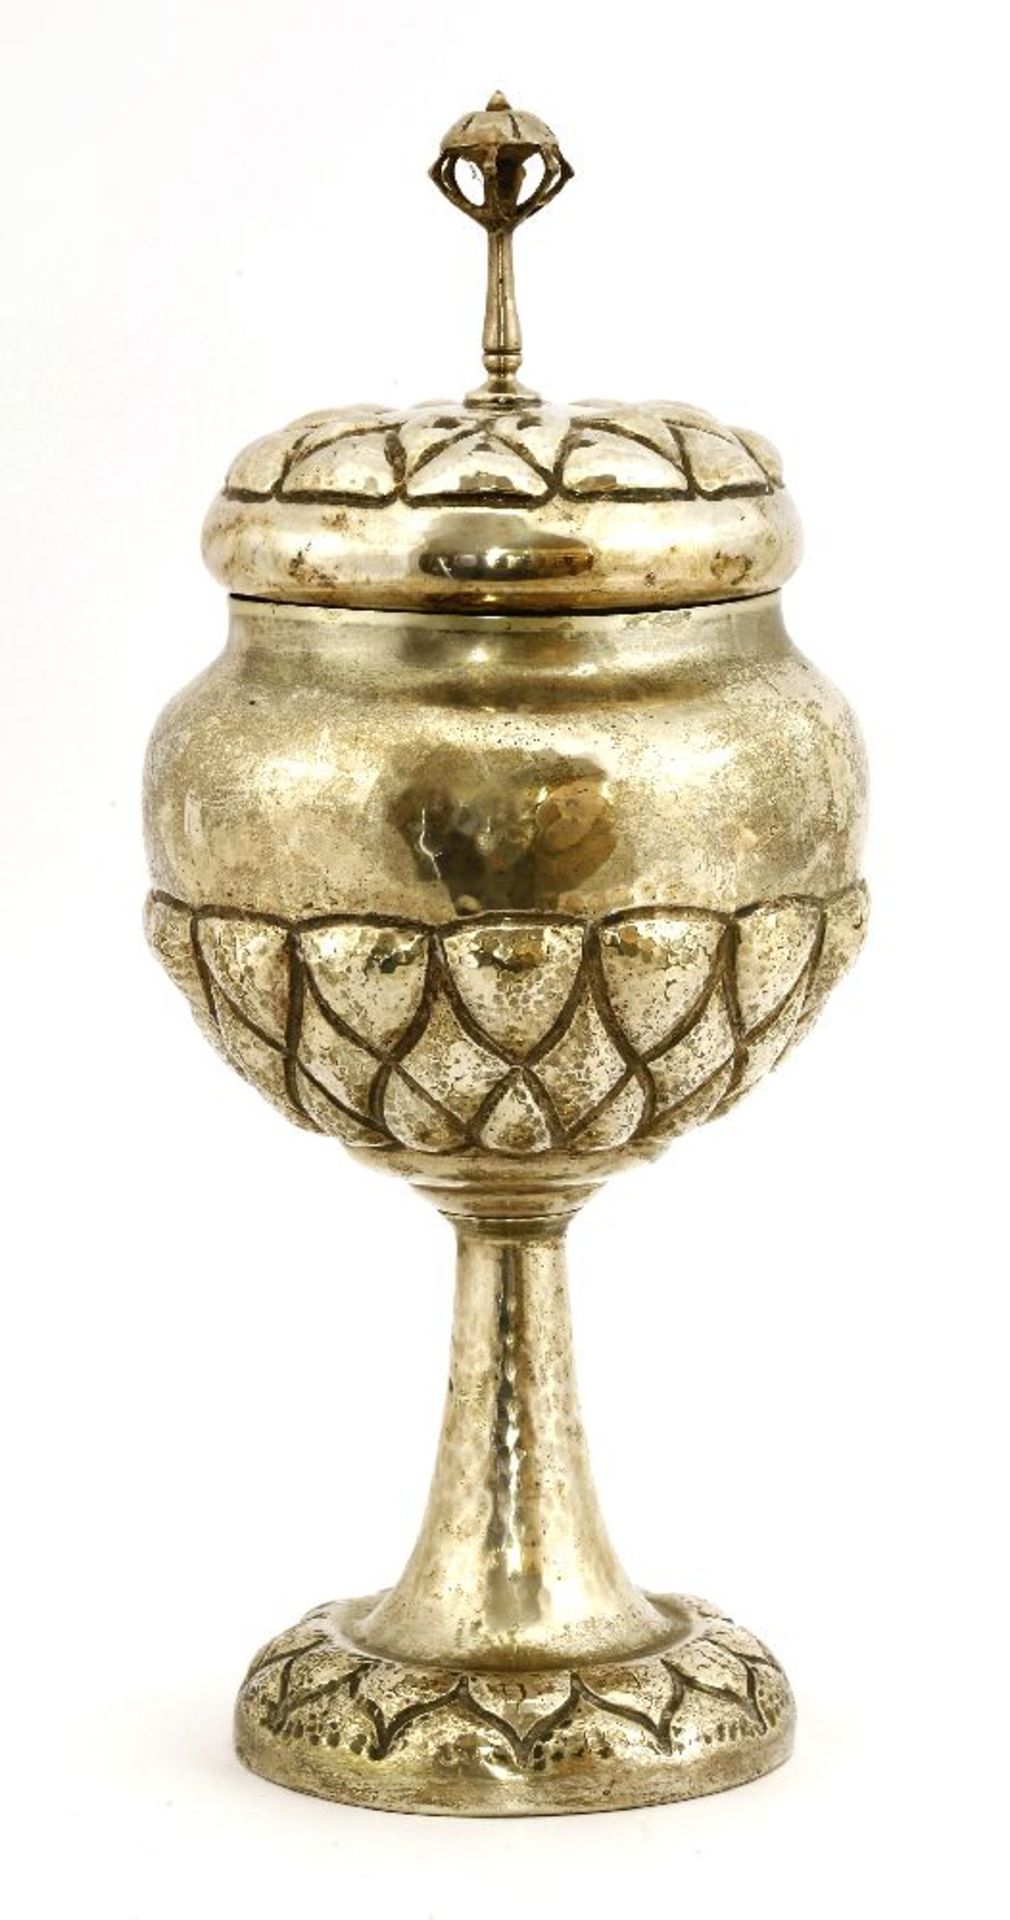 A Continental silver-plated cup and cover,with embossed details, on a tapering column and conforming